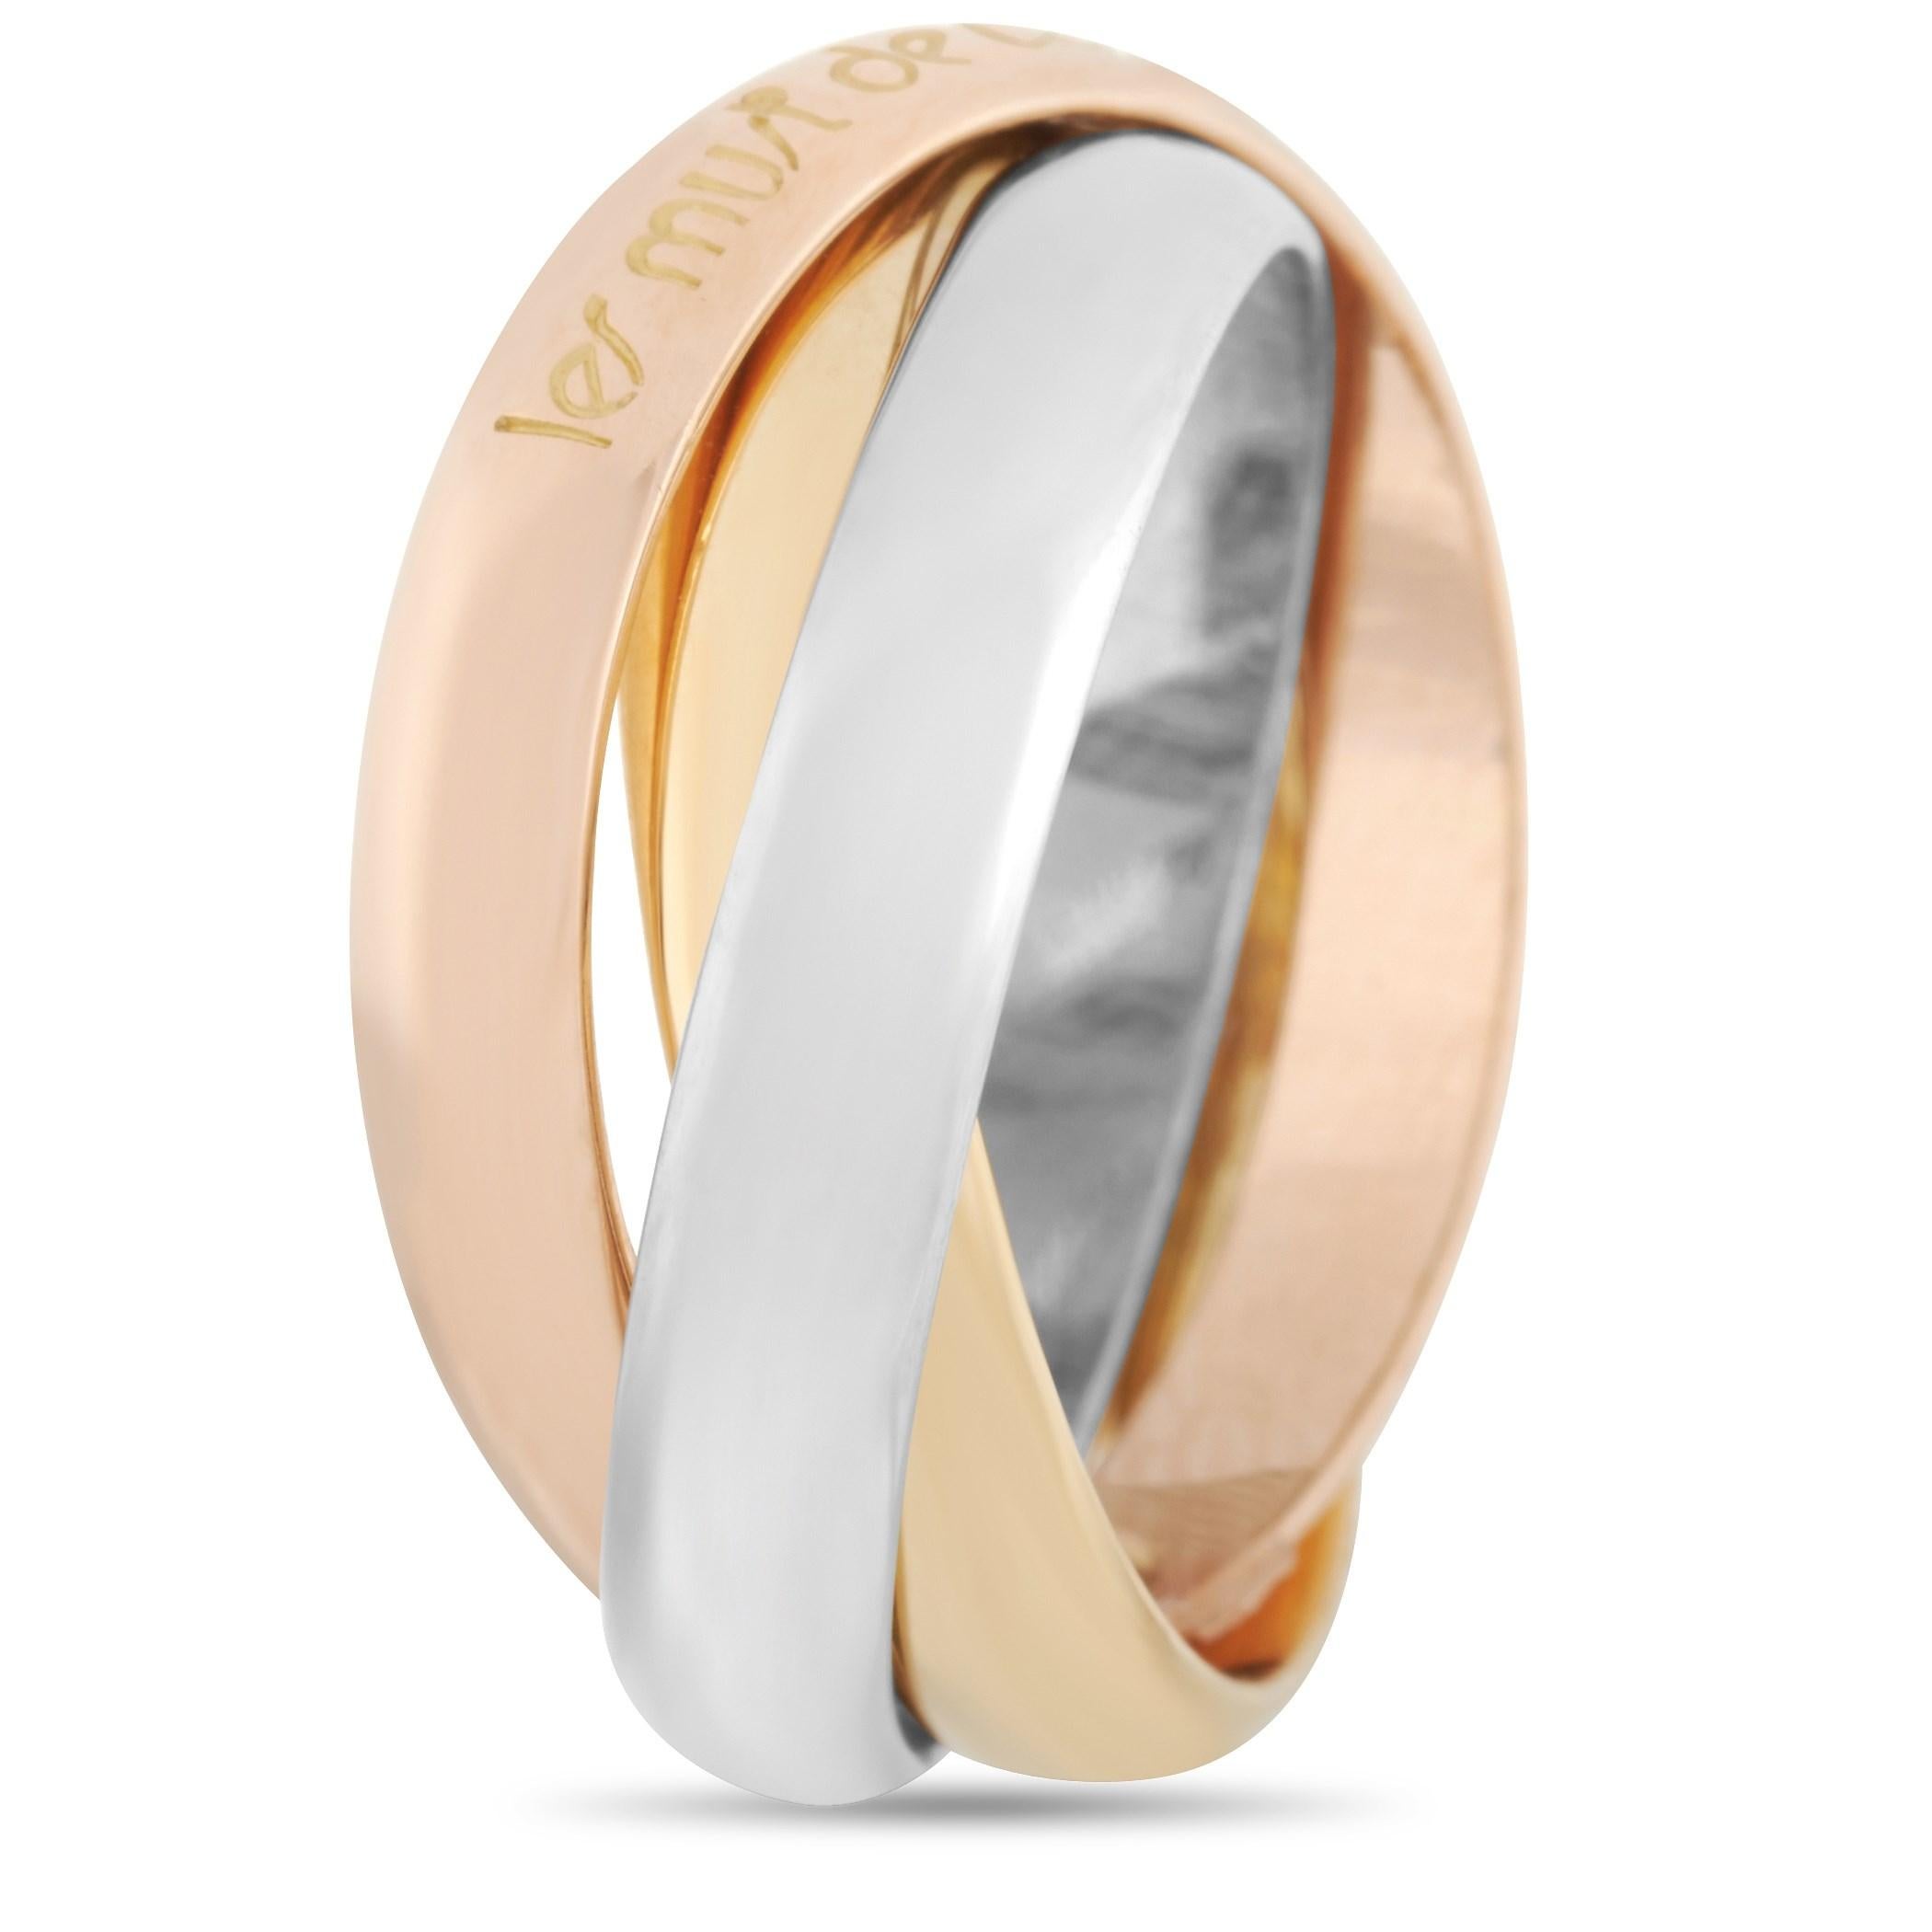 This Cartier “Trinity” ring is crafted with 18K yellow, rose and white gold and weighs 7.9 grams. The ring boasts a band thickness of 8 mm and features an engraved text on the ring 